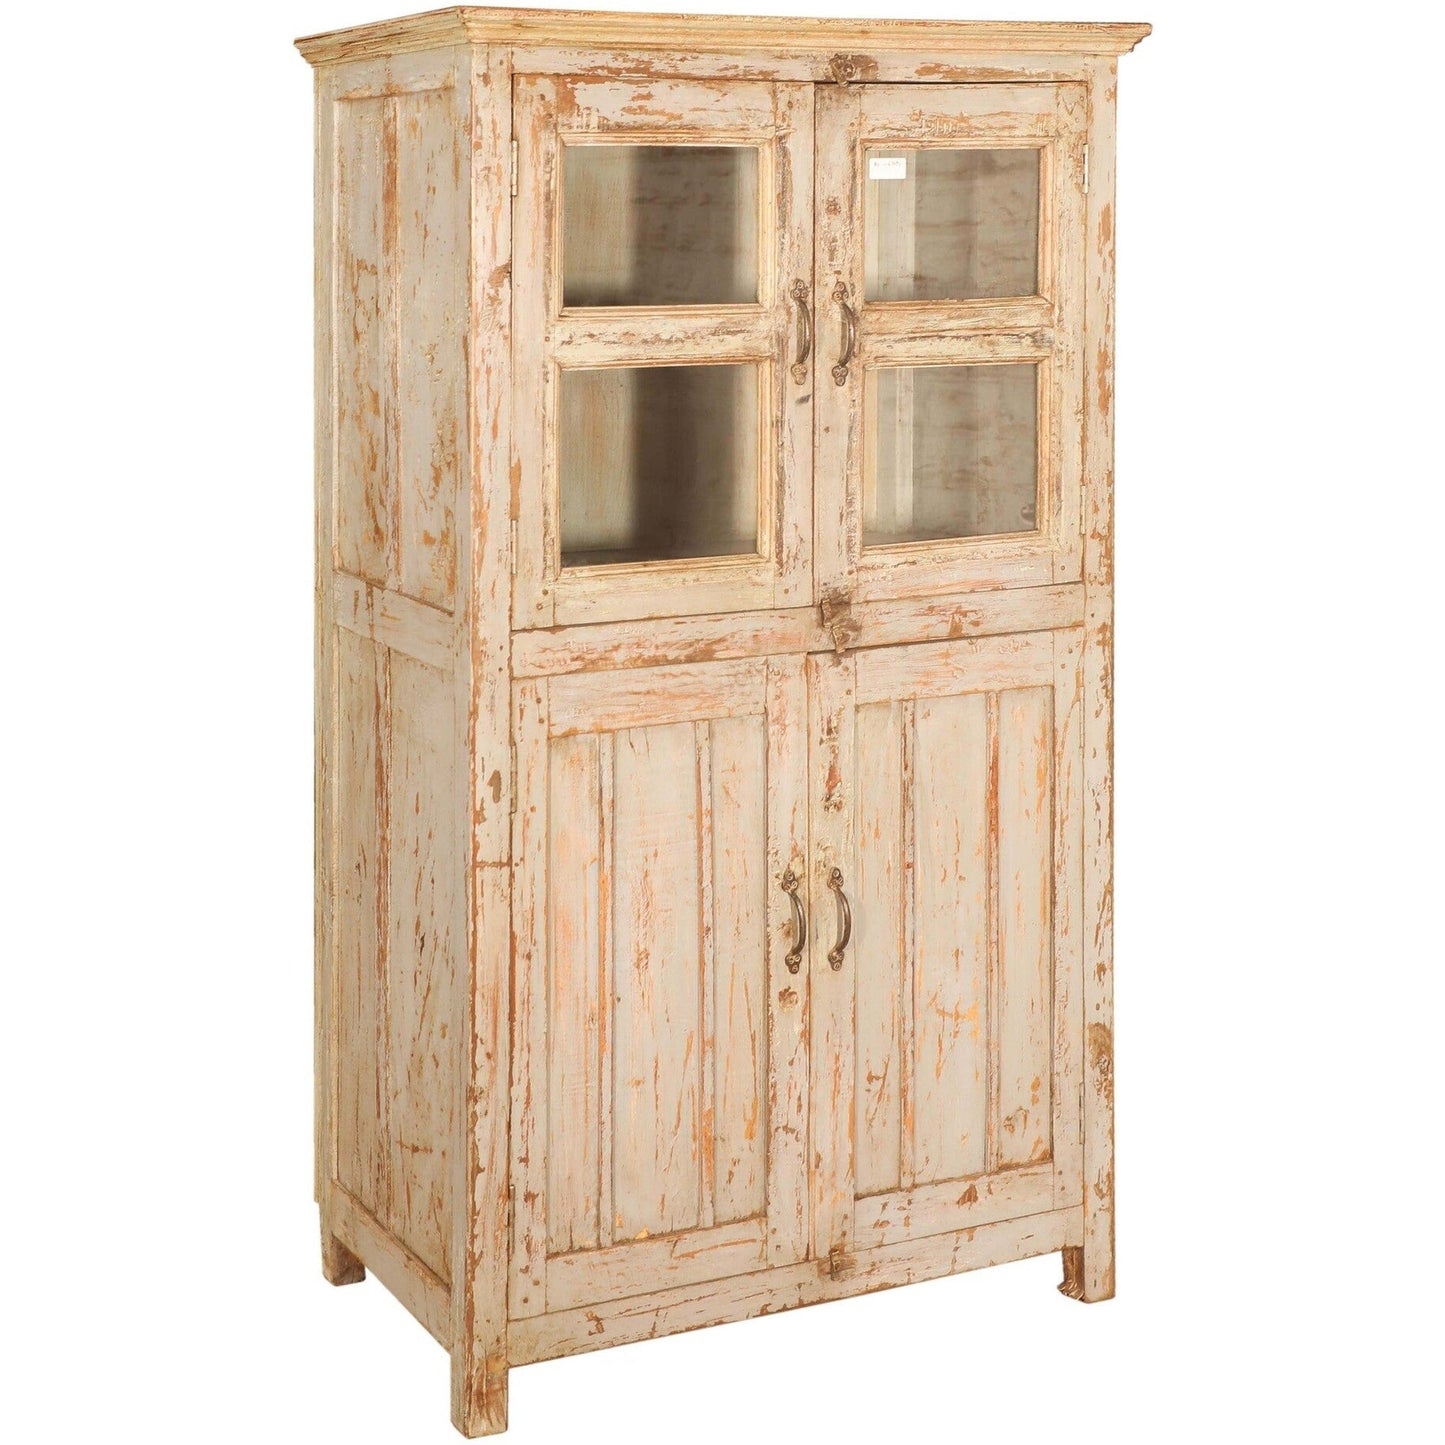 RM-058532, Wooden Cabinet With Glass